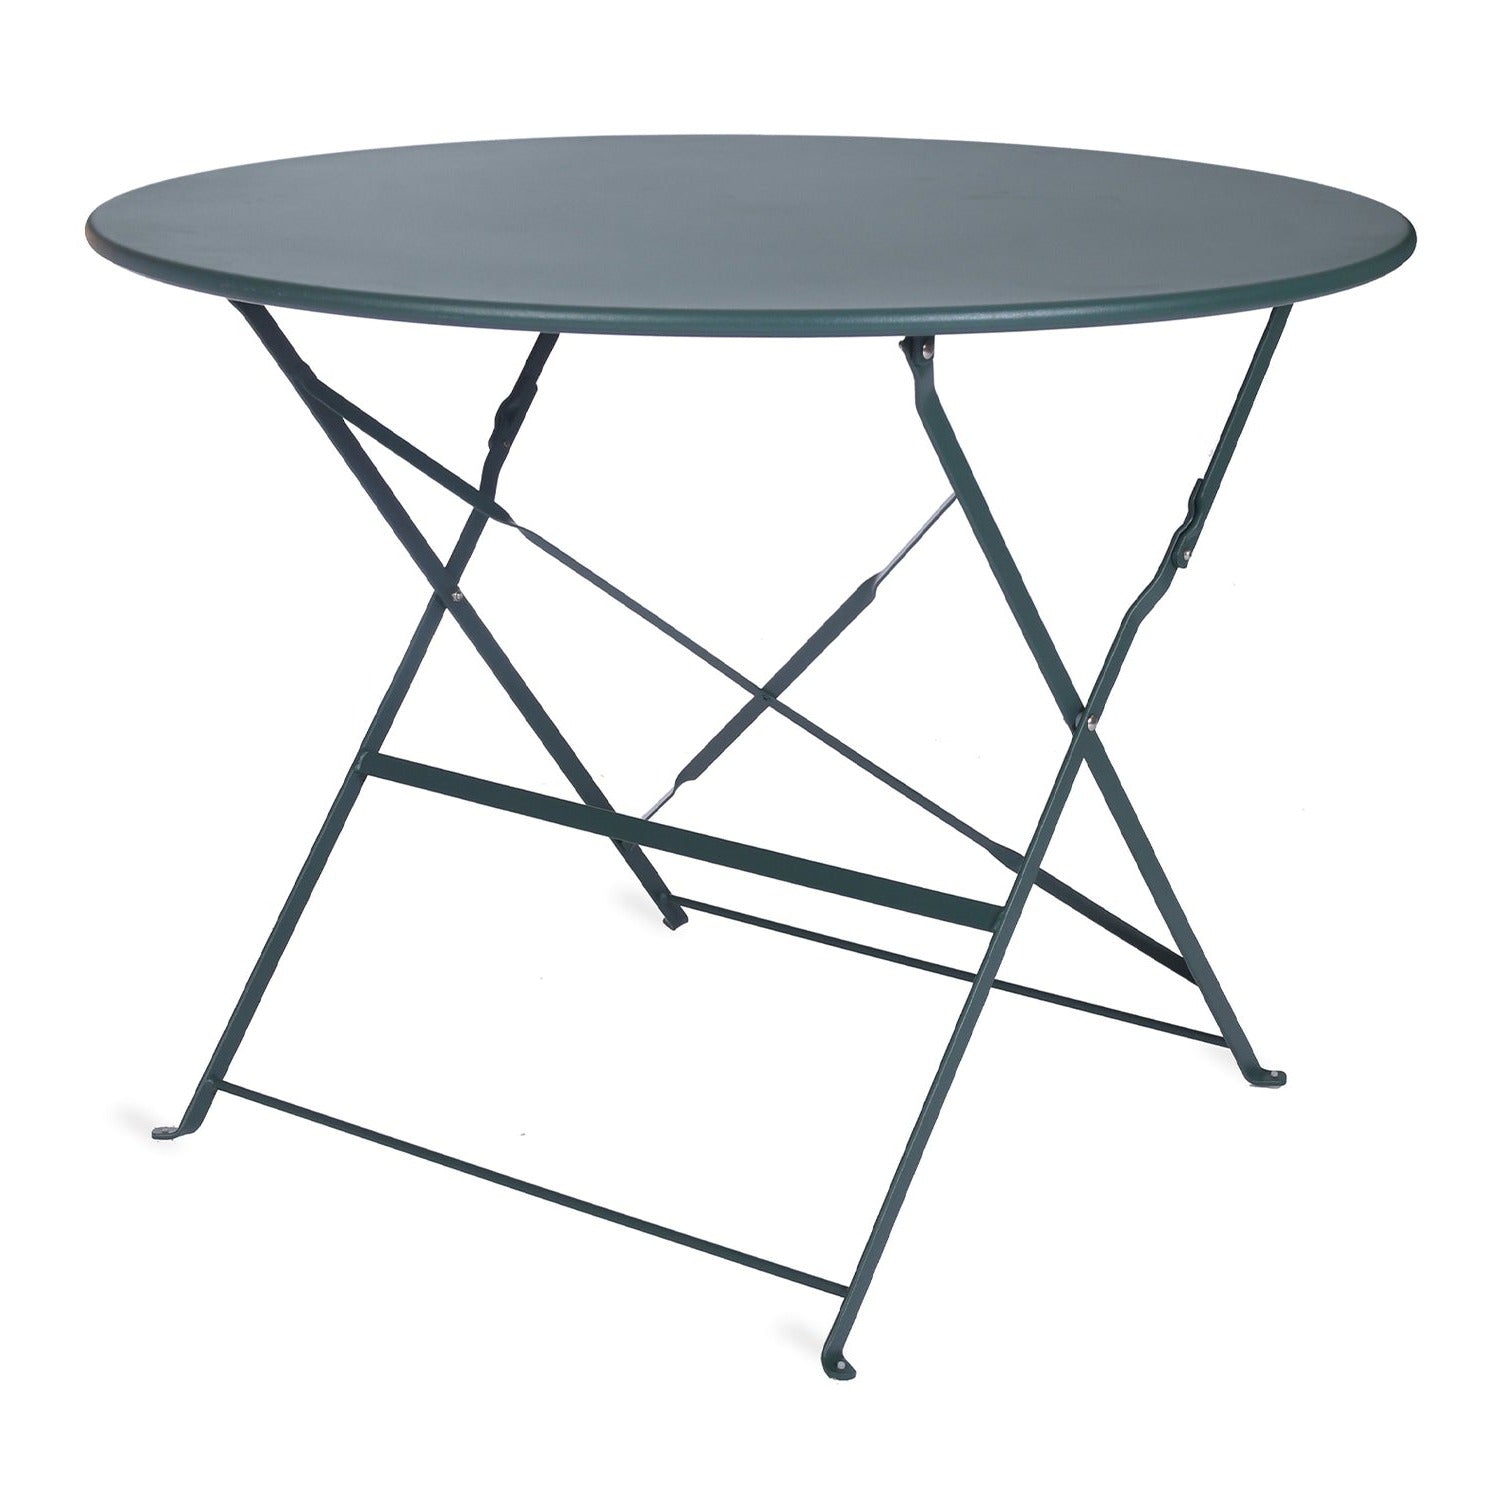 Rive Droite Bistro Table Large Forest Green Steel by Garden Trading